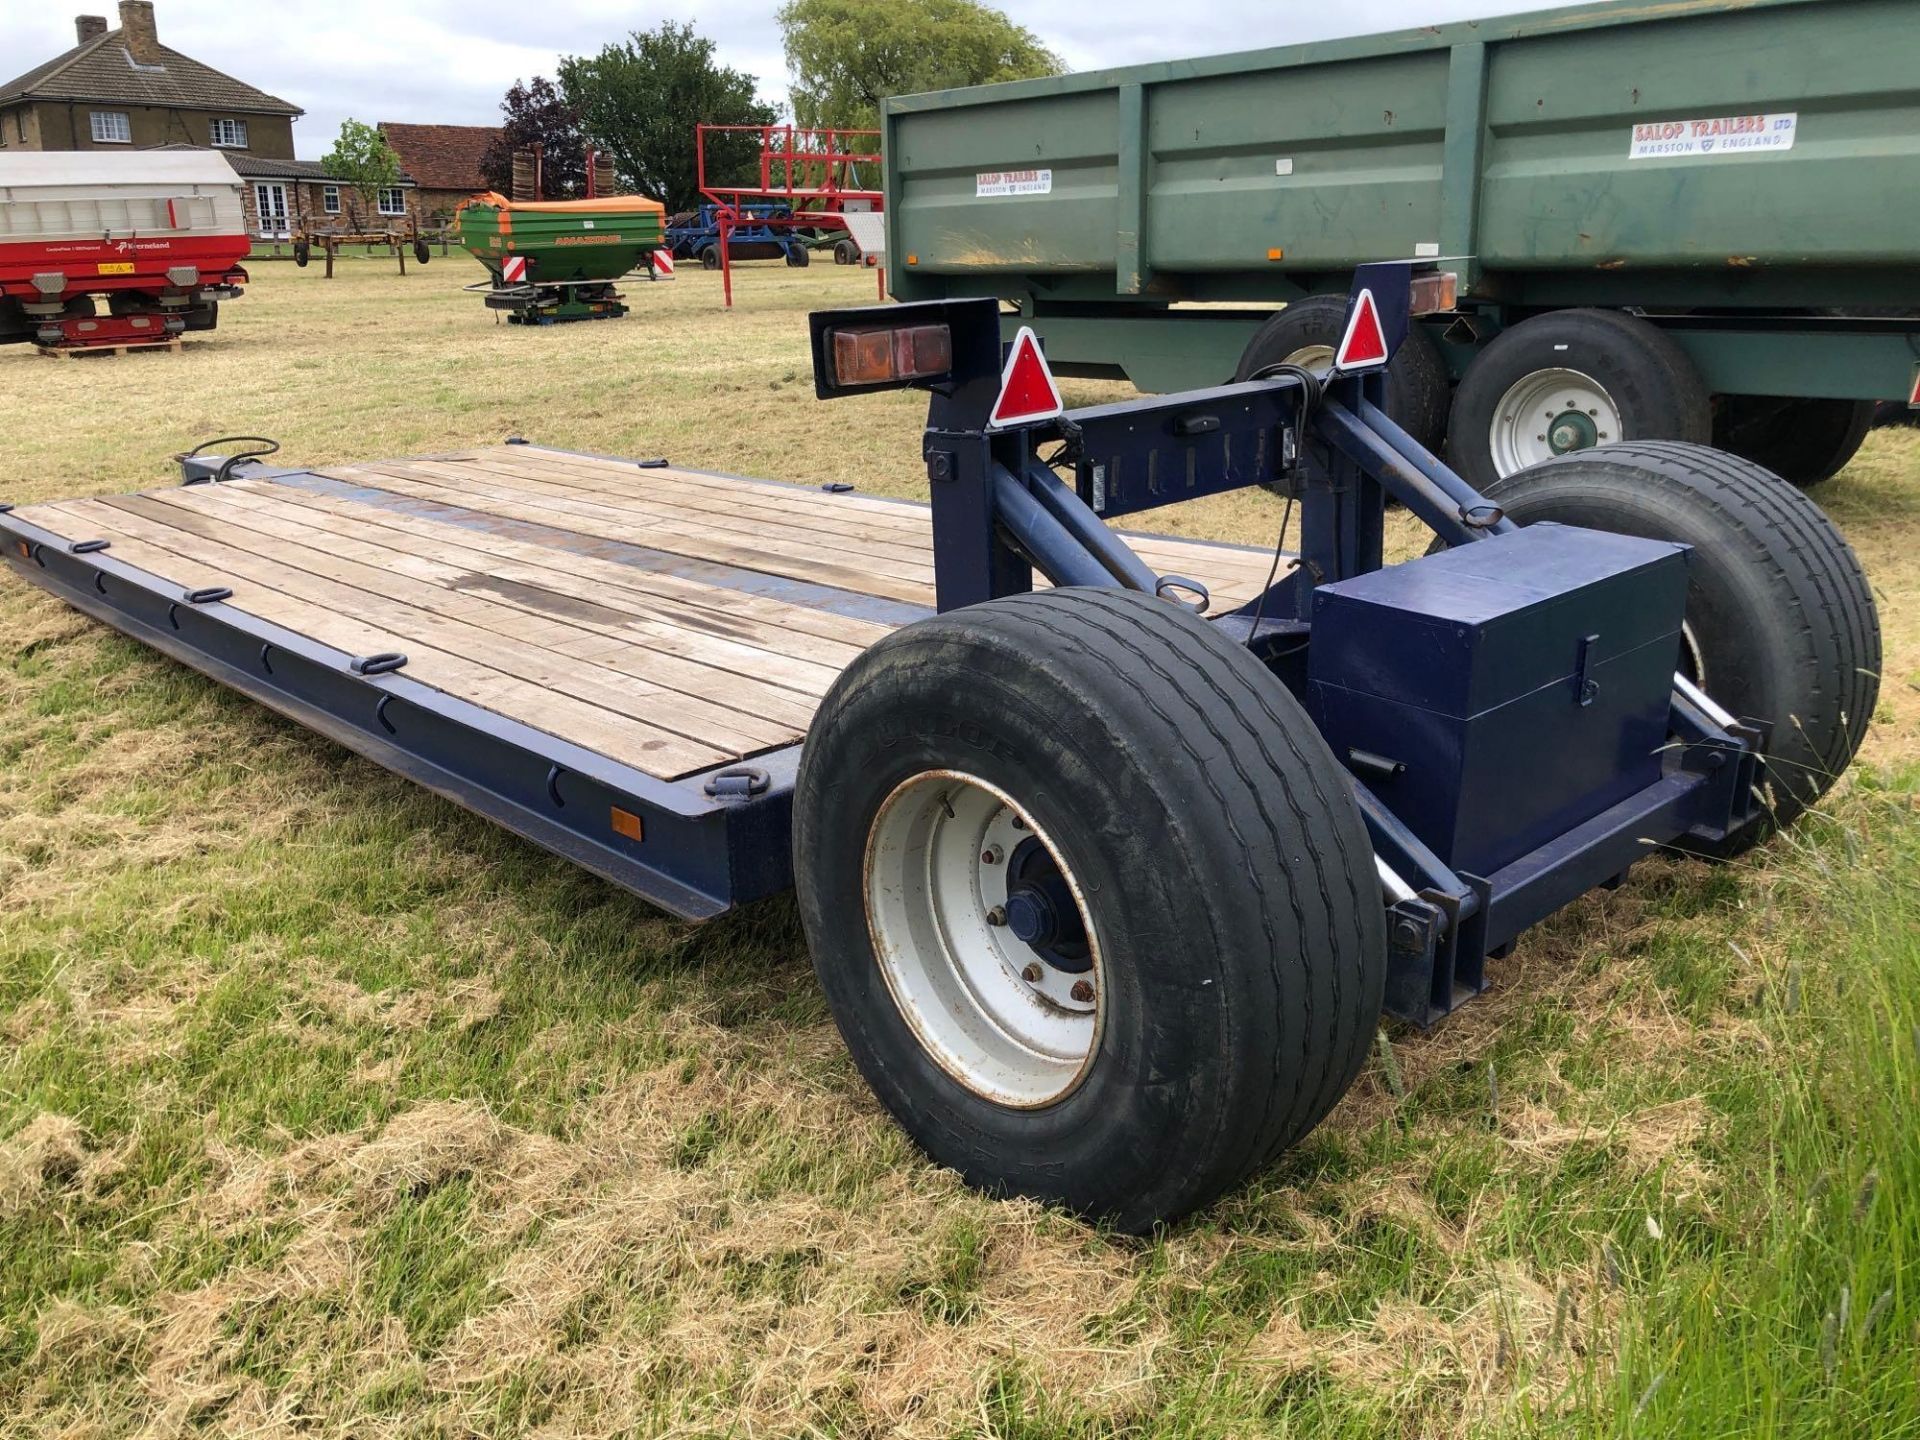 8t drop deck low loader with lights, hydraulic brakes and storage box 5.25m x 2.40m - Image 7 of 7